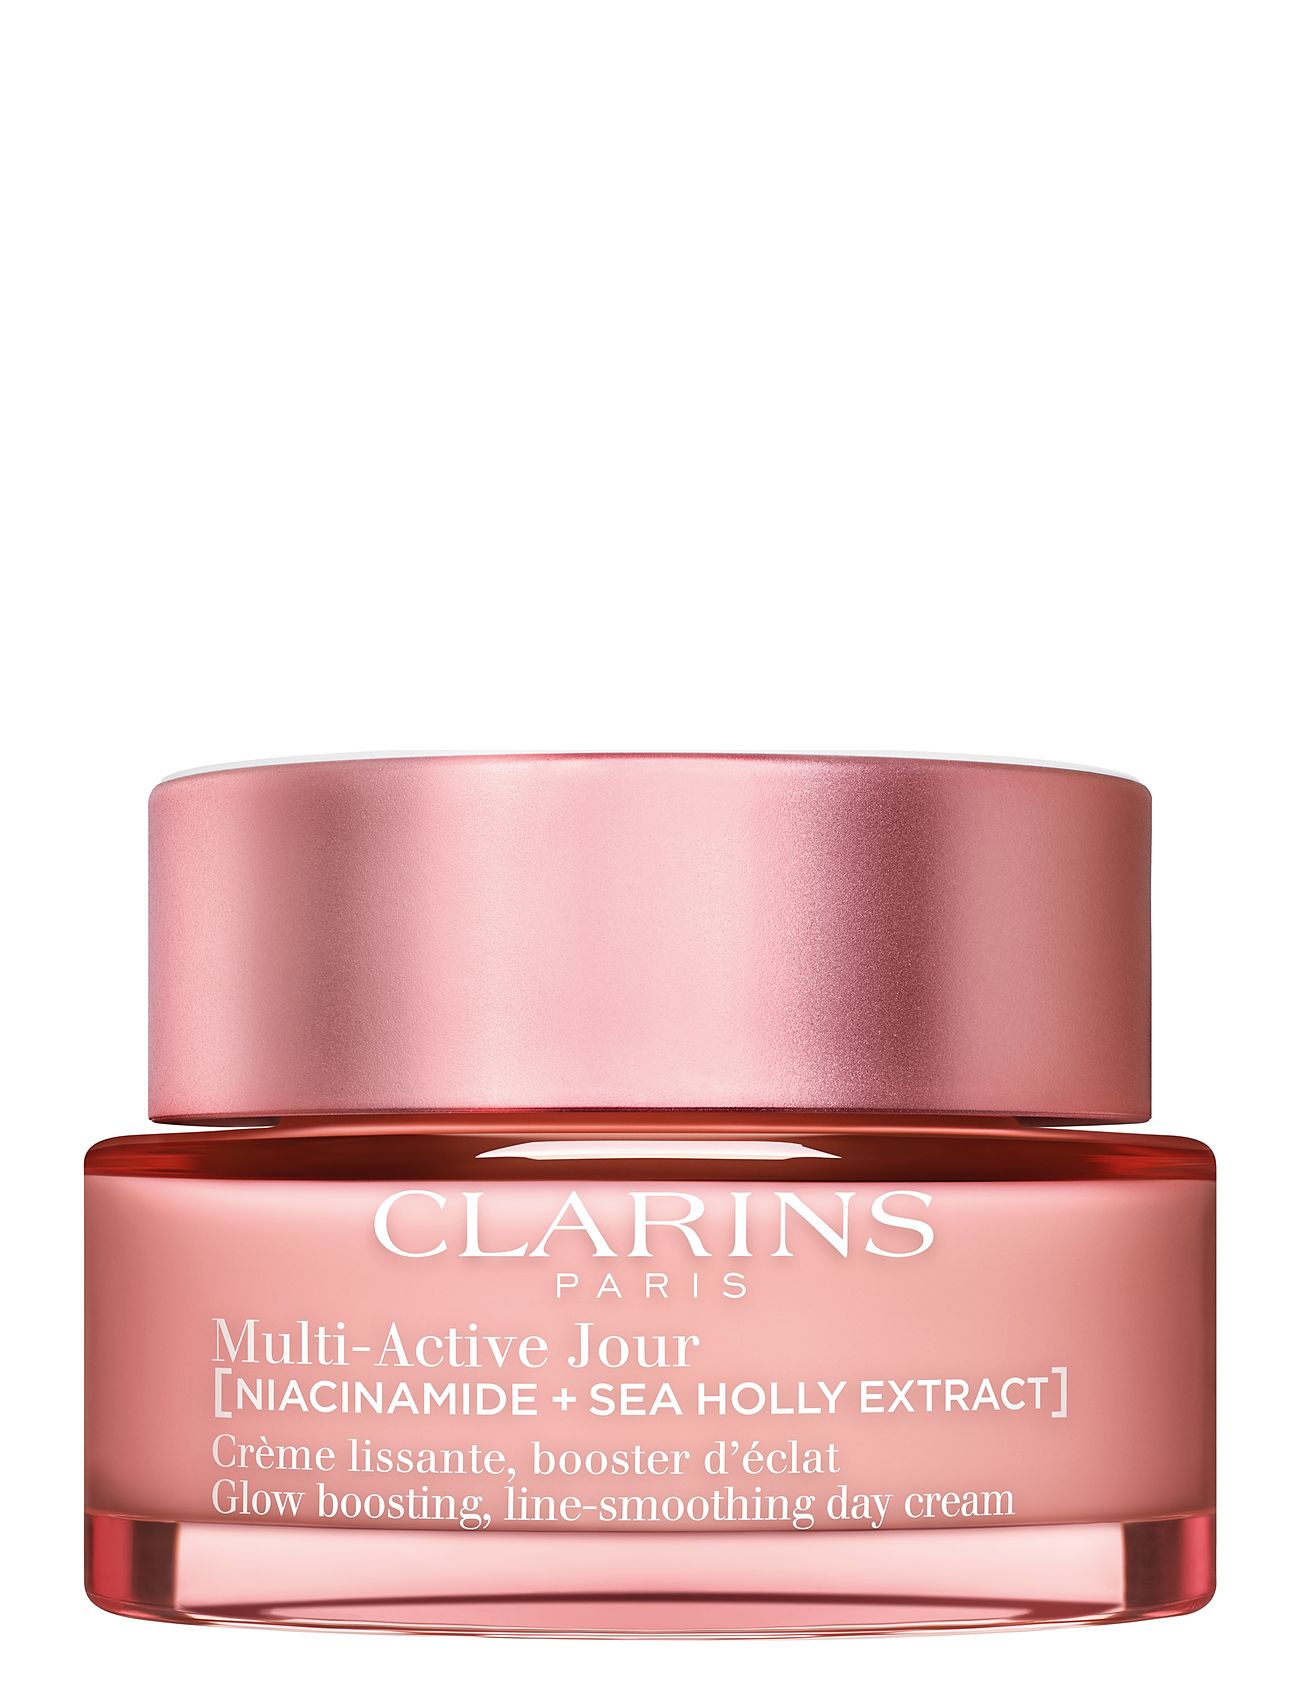 Multi-Acive Glow Boosting, Line-Smoothing Day Cream All Skin Types Fugtighedscreme Dagcreme Nude Clarins